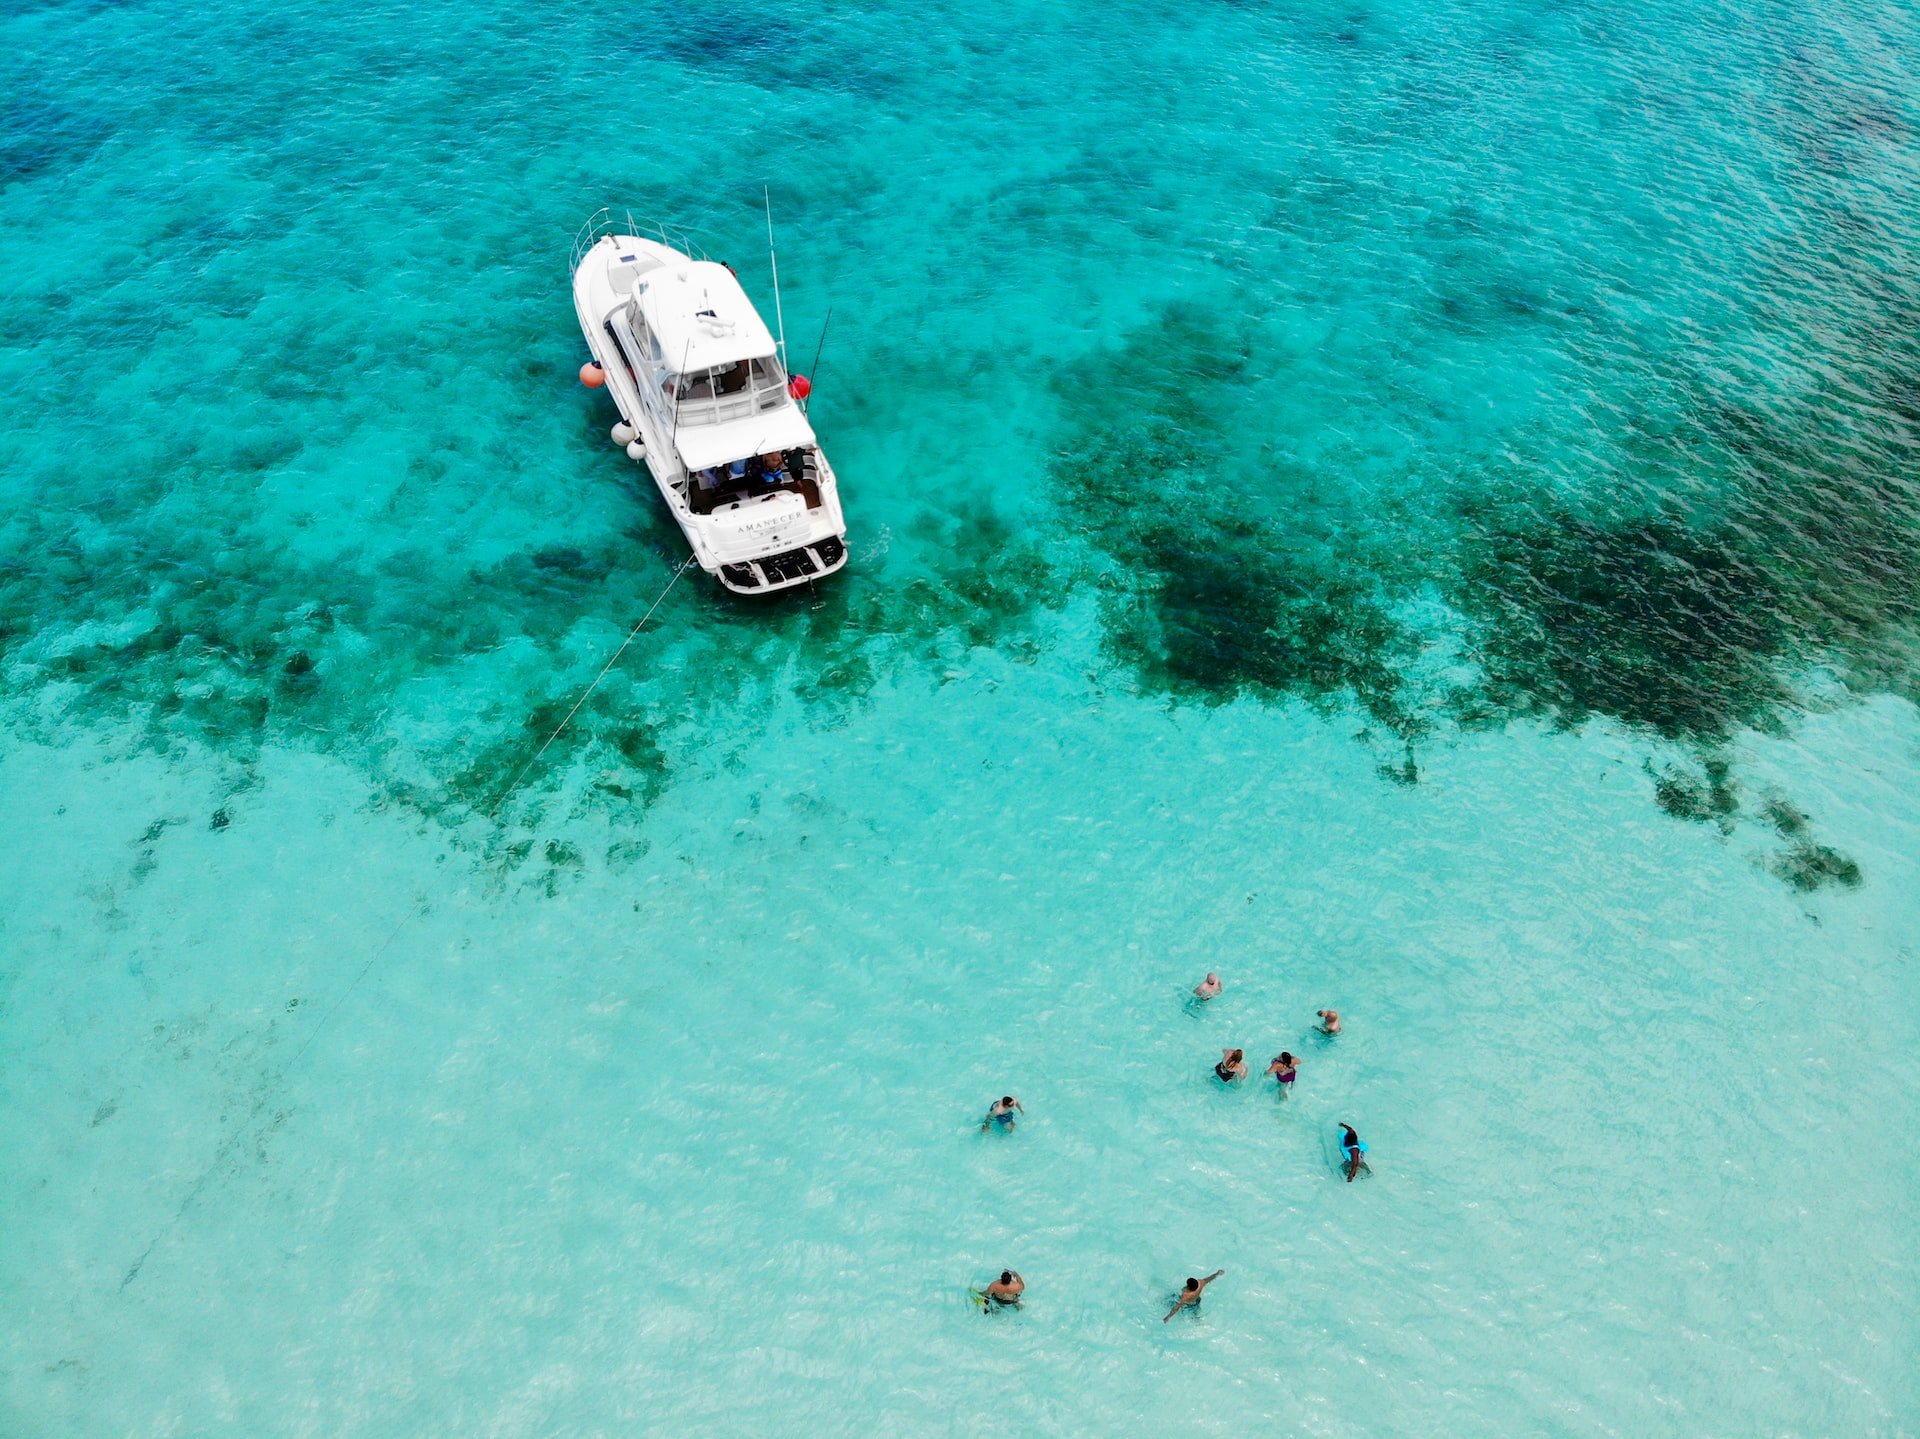 A yacht and swimmers off El Cielo beach, an excellent Cozumel snorkeling spot in Mexico. (photo: Fernando Jorge)